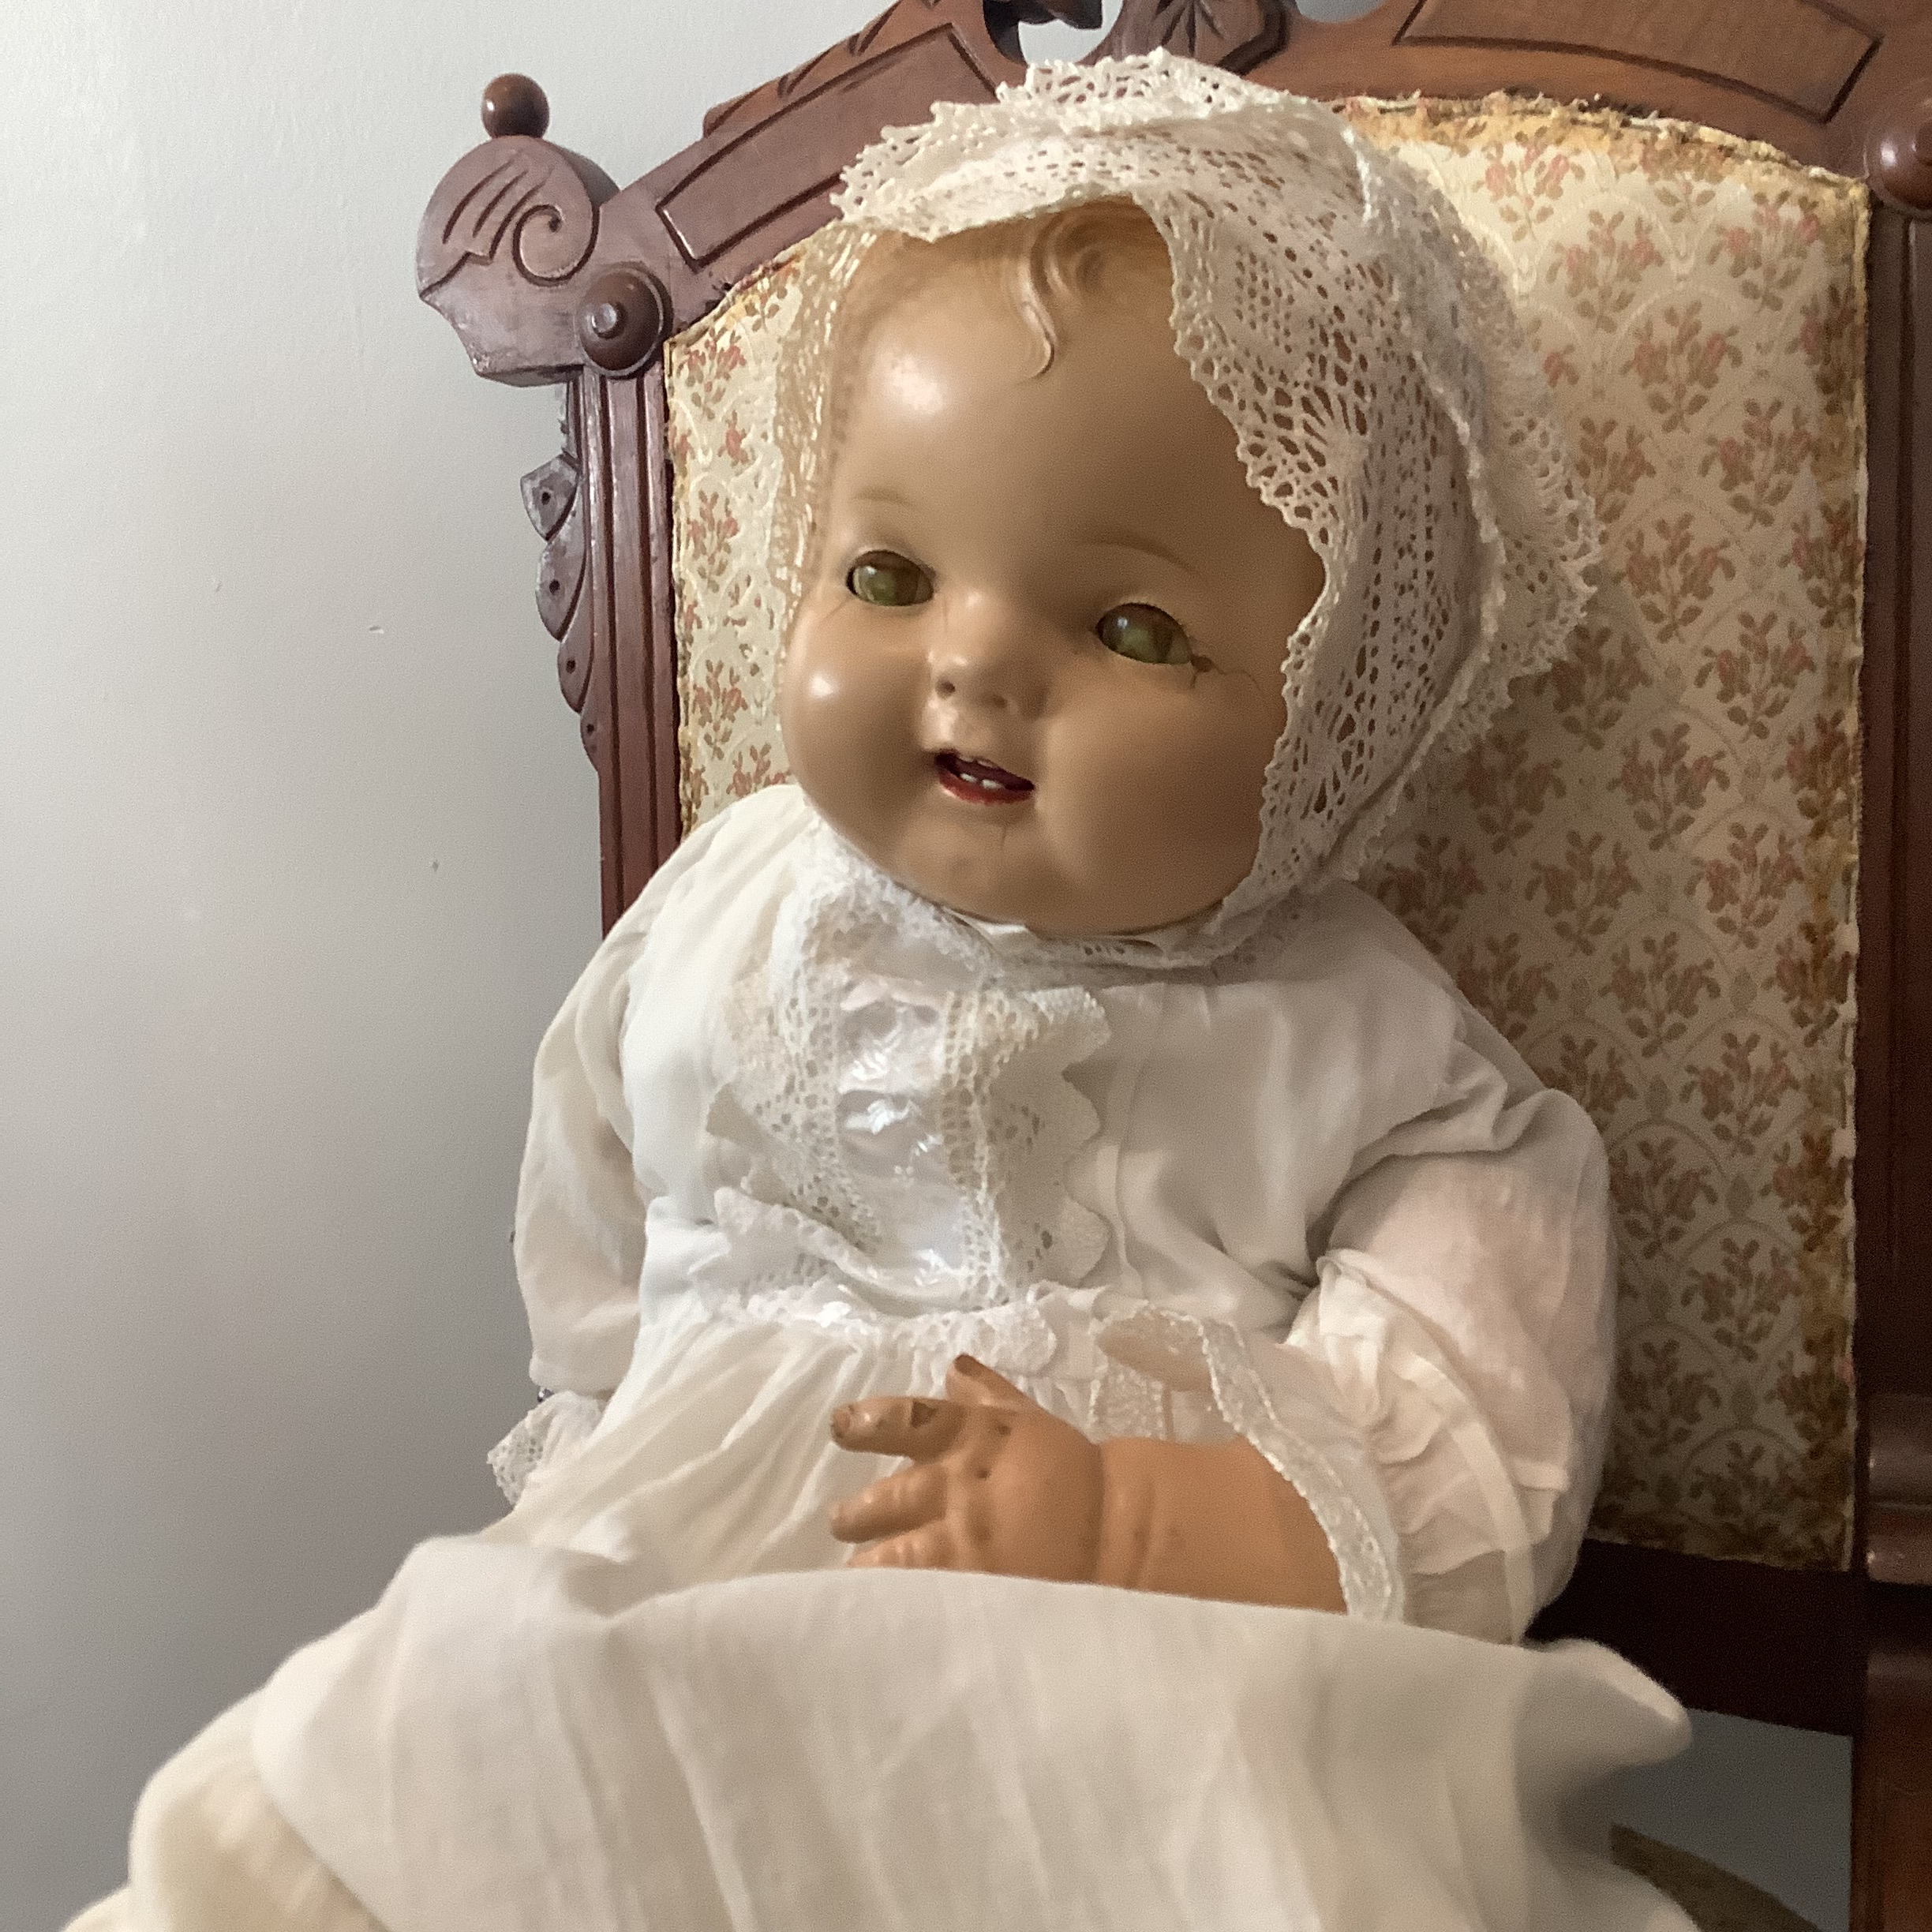 Vintage baby doll in elaborate christening gown with lace trim, seated in a chair.